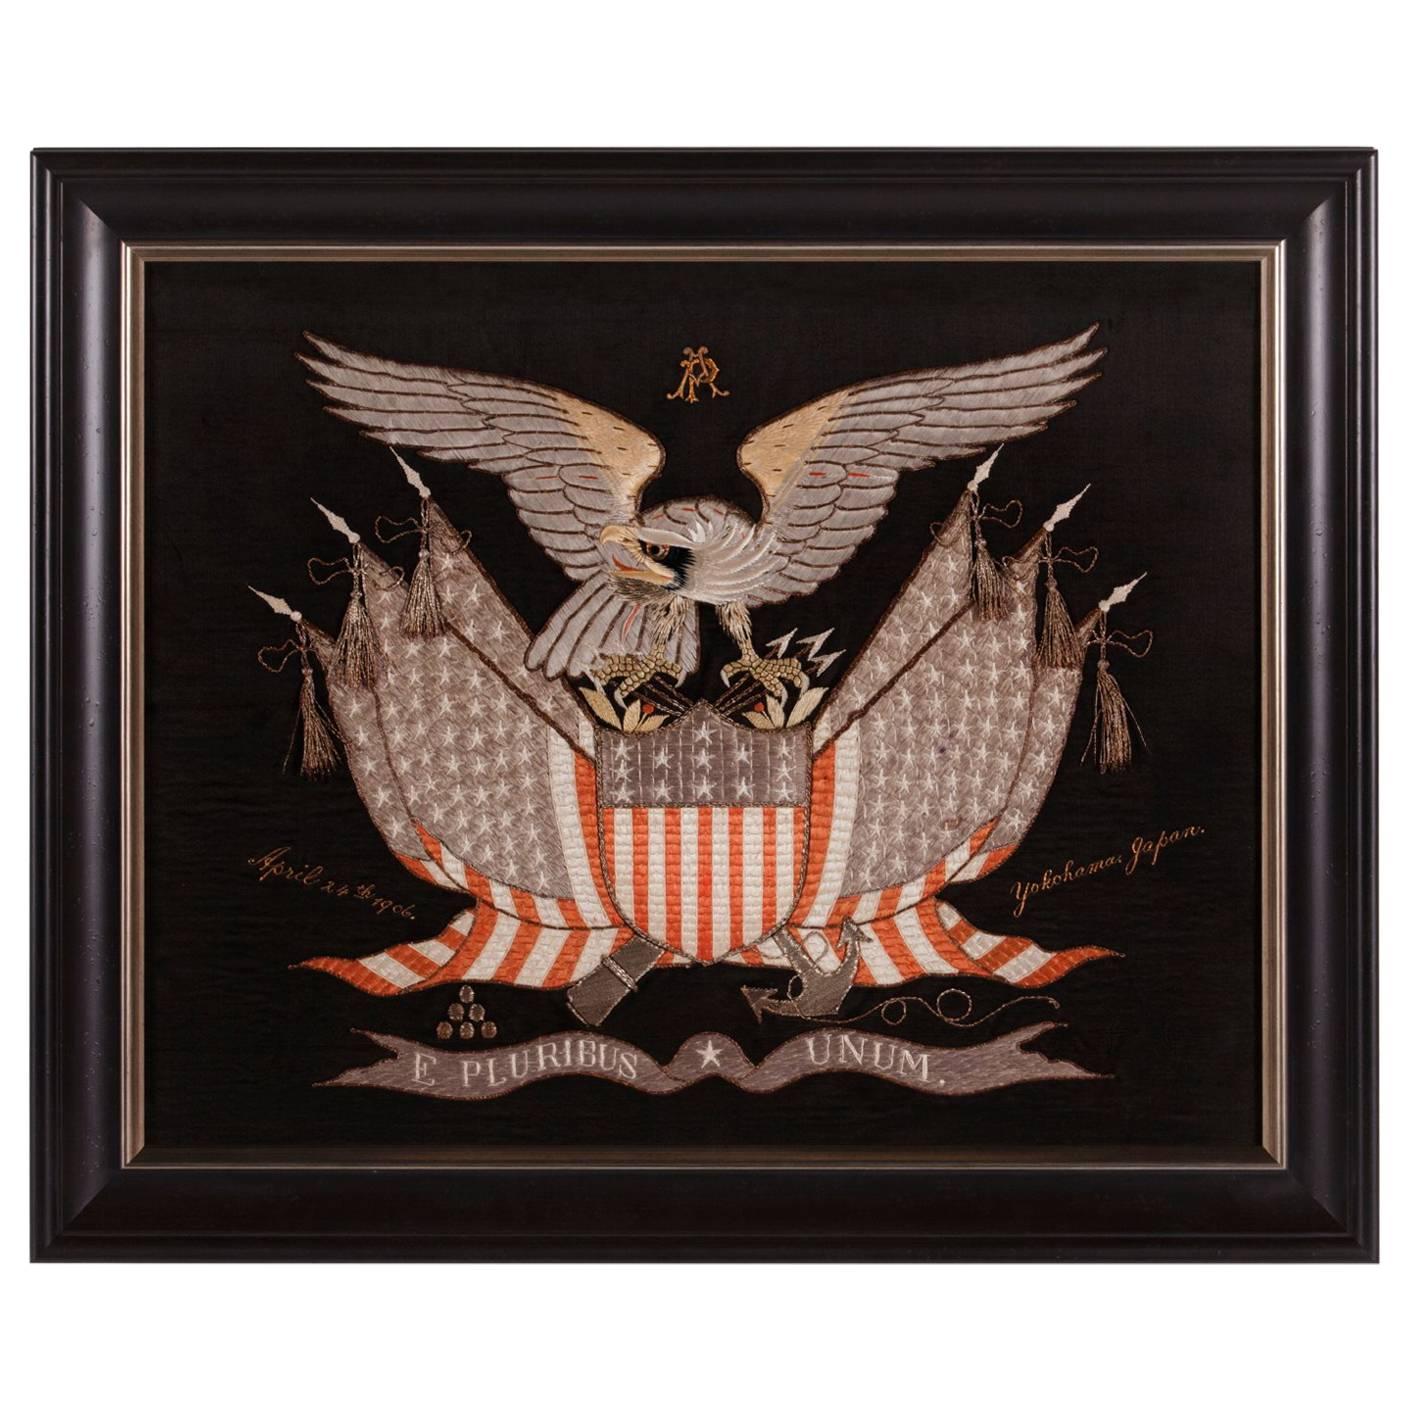 Elaborate Sailor's Souvenir Embroidery from the Orient With a Large Eagle 